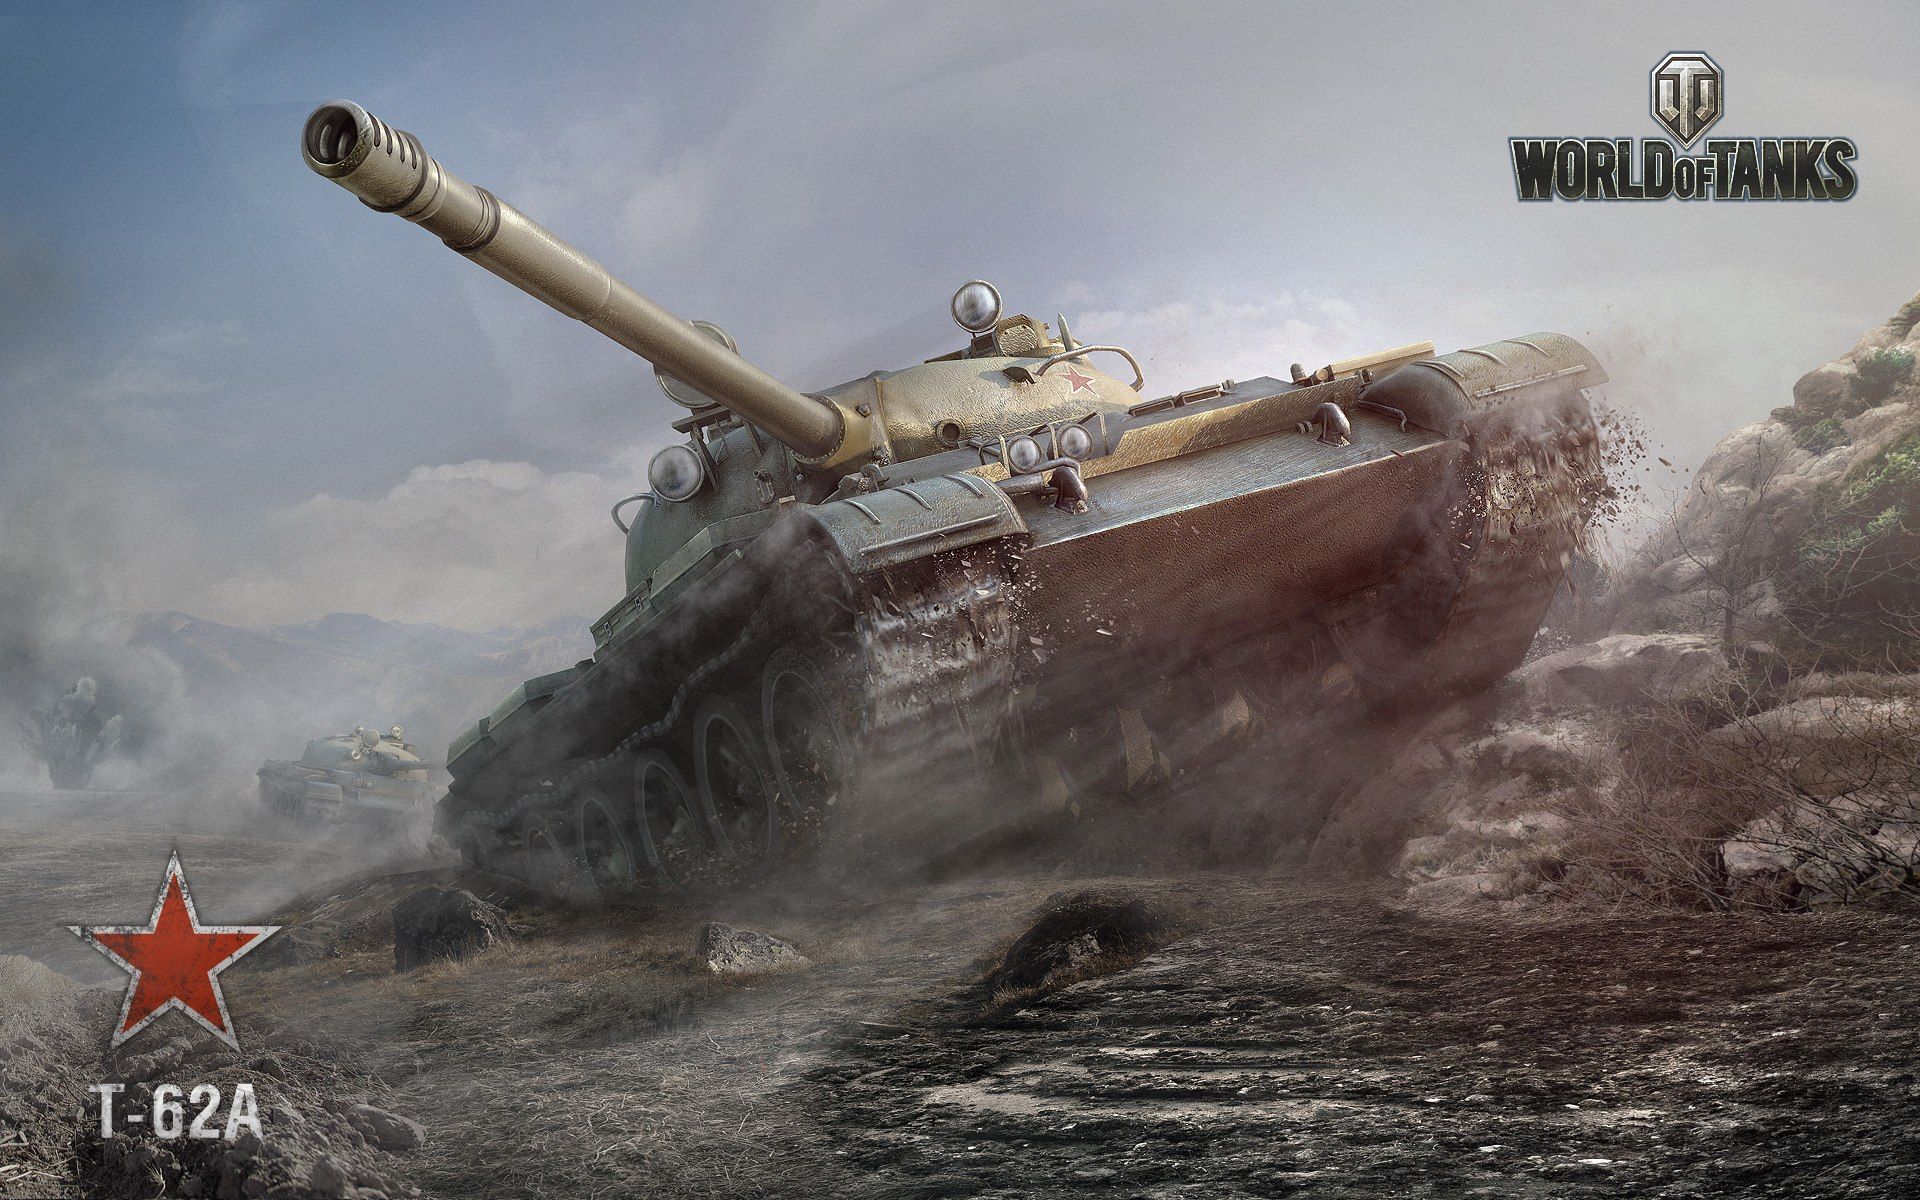 World of tanks wallpaper 1920x1200 - - High Quality and other